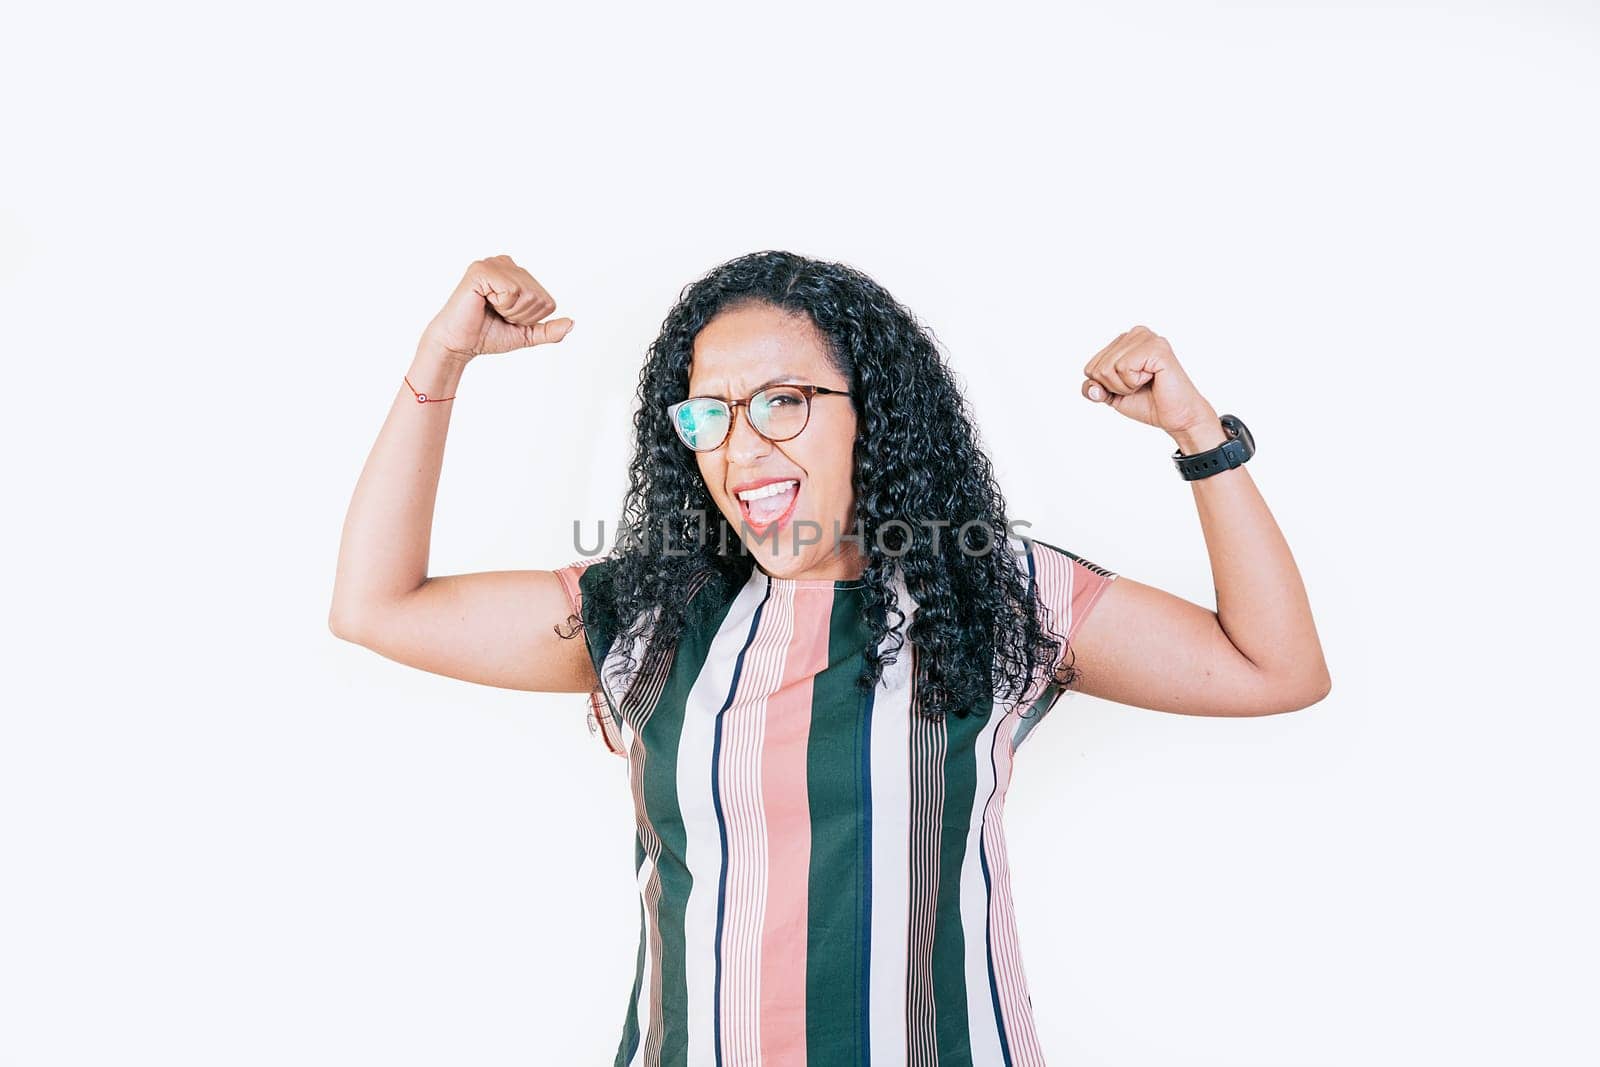 Happy woman raising arms in victory gesture isolated. Winning people celebrating triumph. Excited afro girl raising arms celebrating victory by isaiphoto